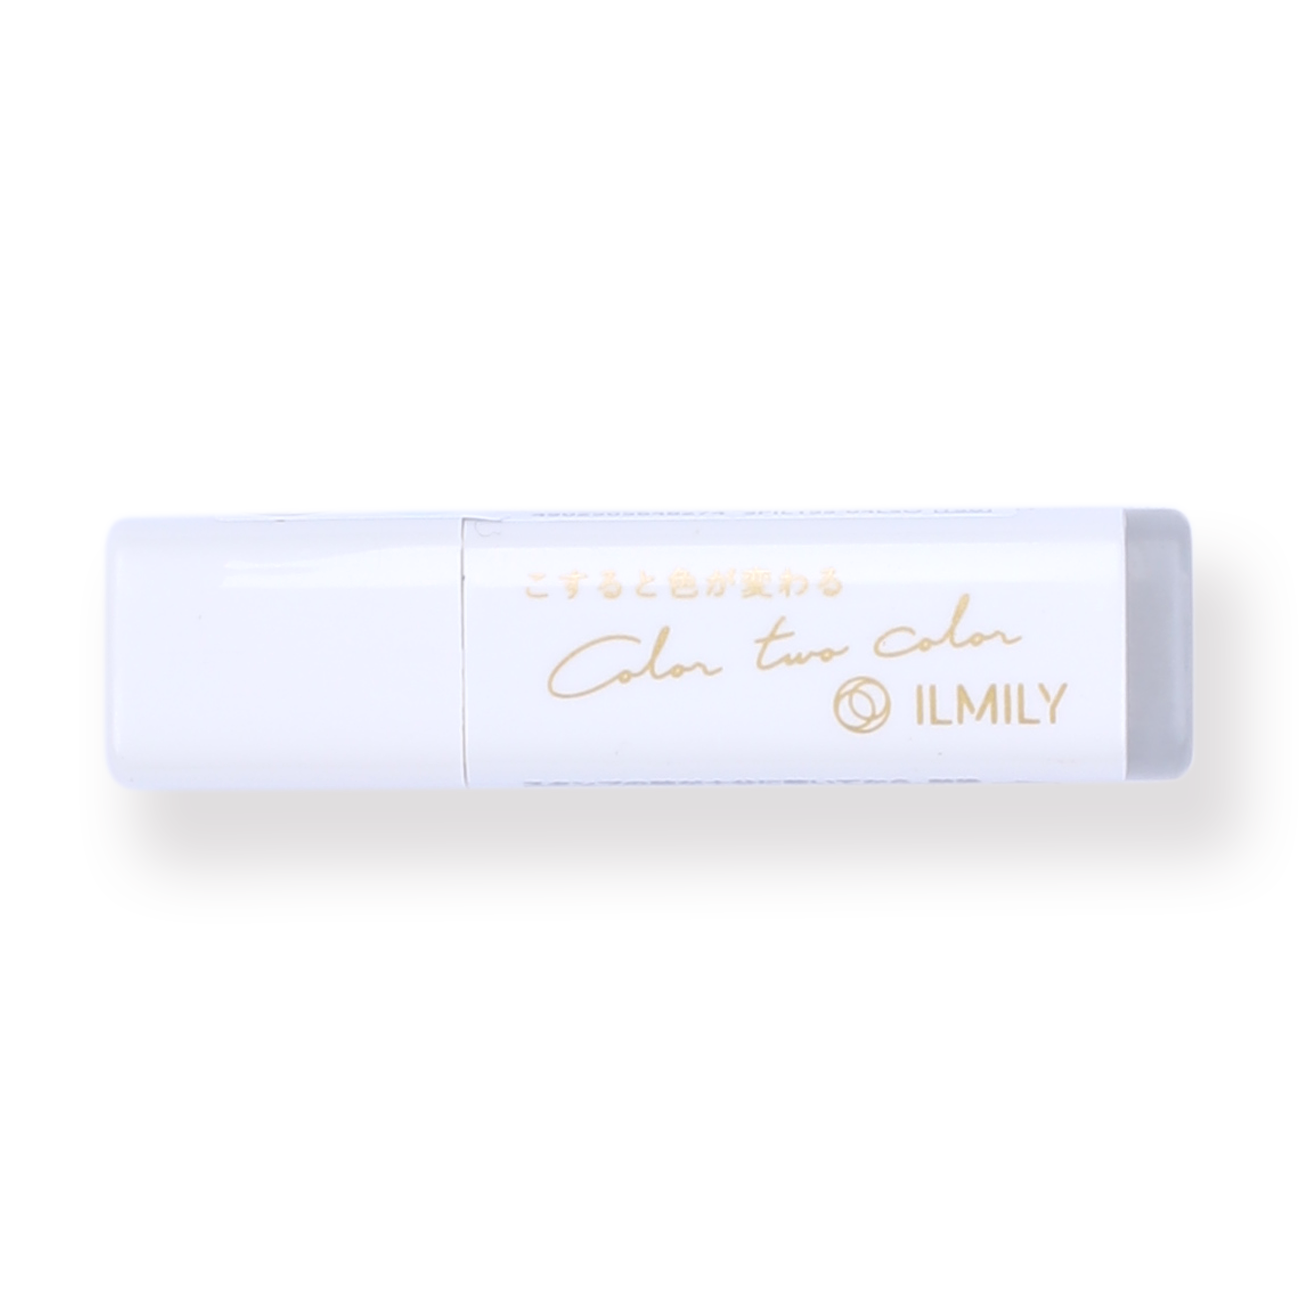 Pilot ILMILY Limited Edition Erasable Stamp - Rosette - Stationery Pal